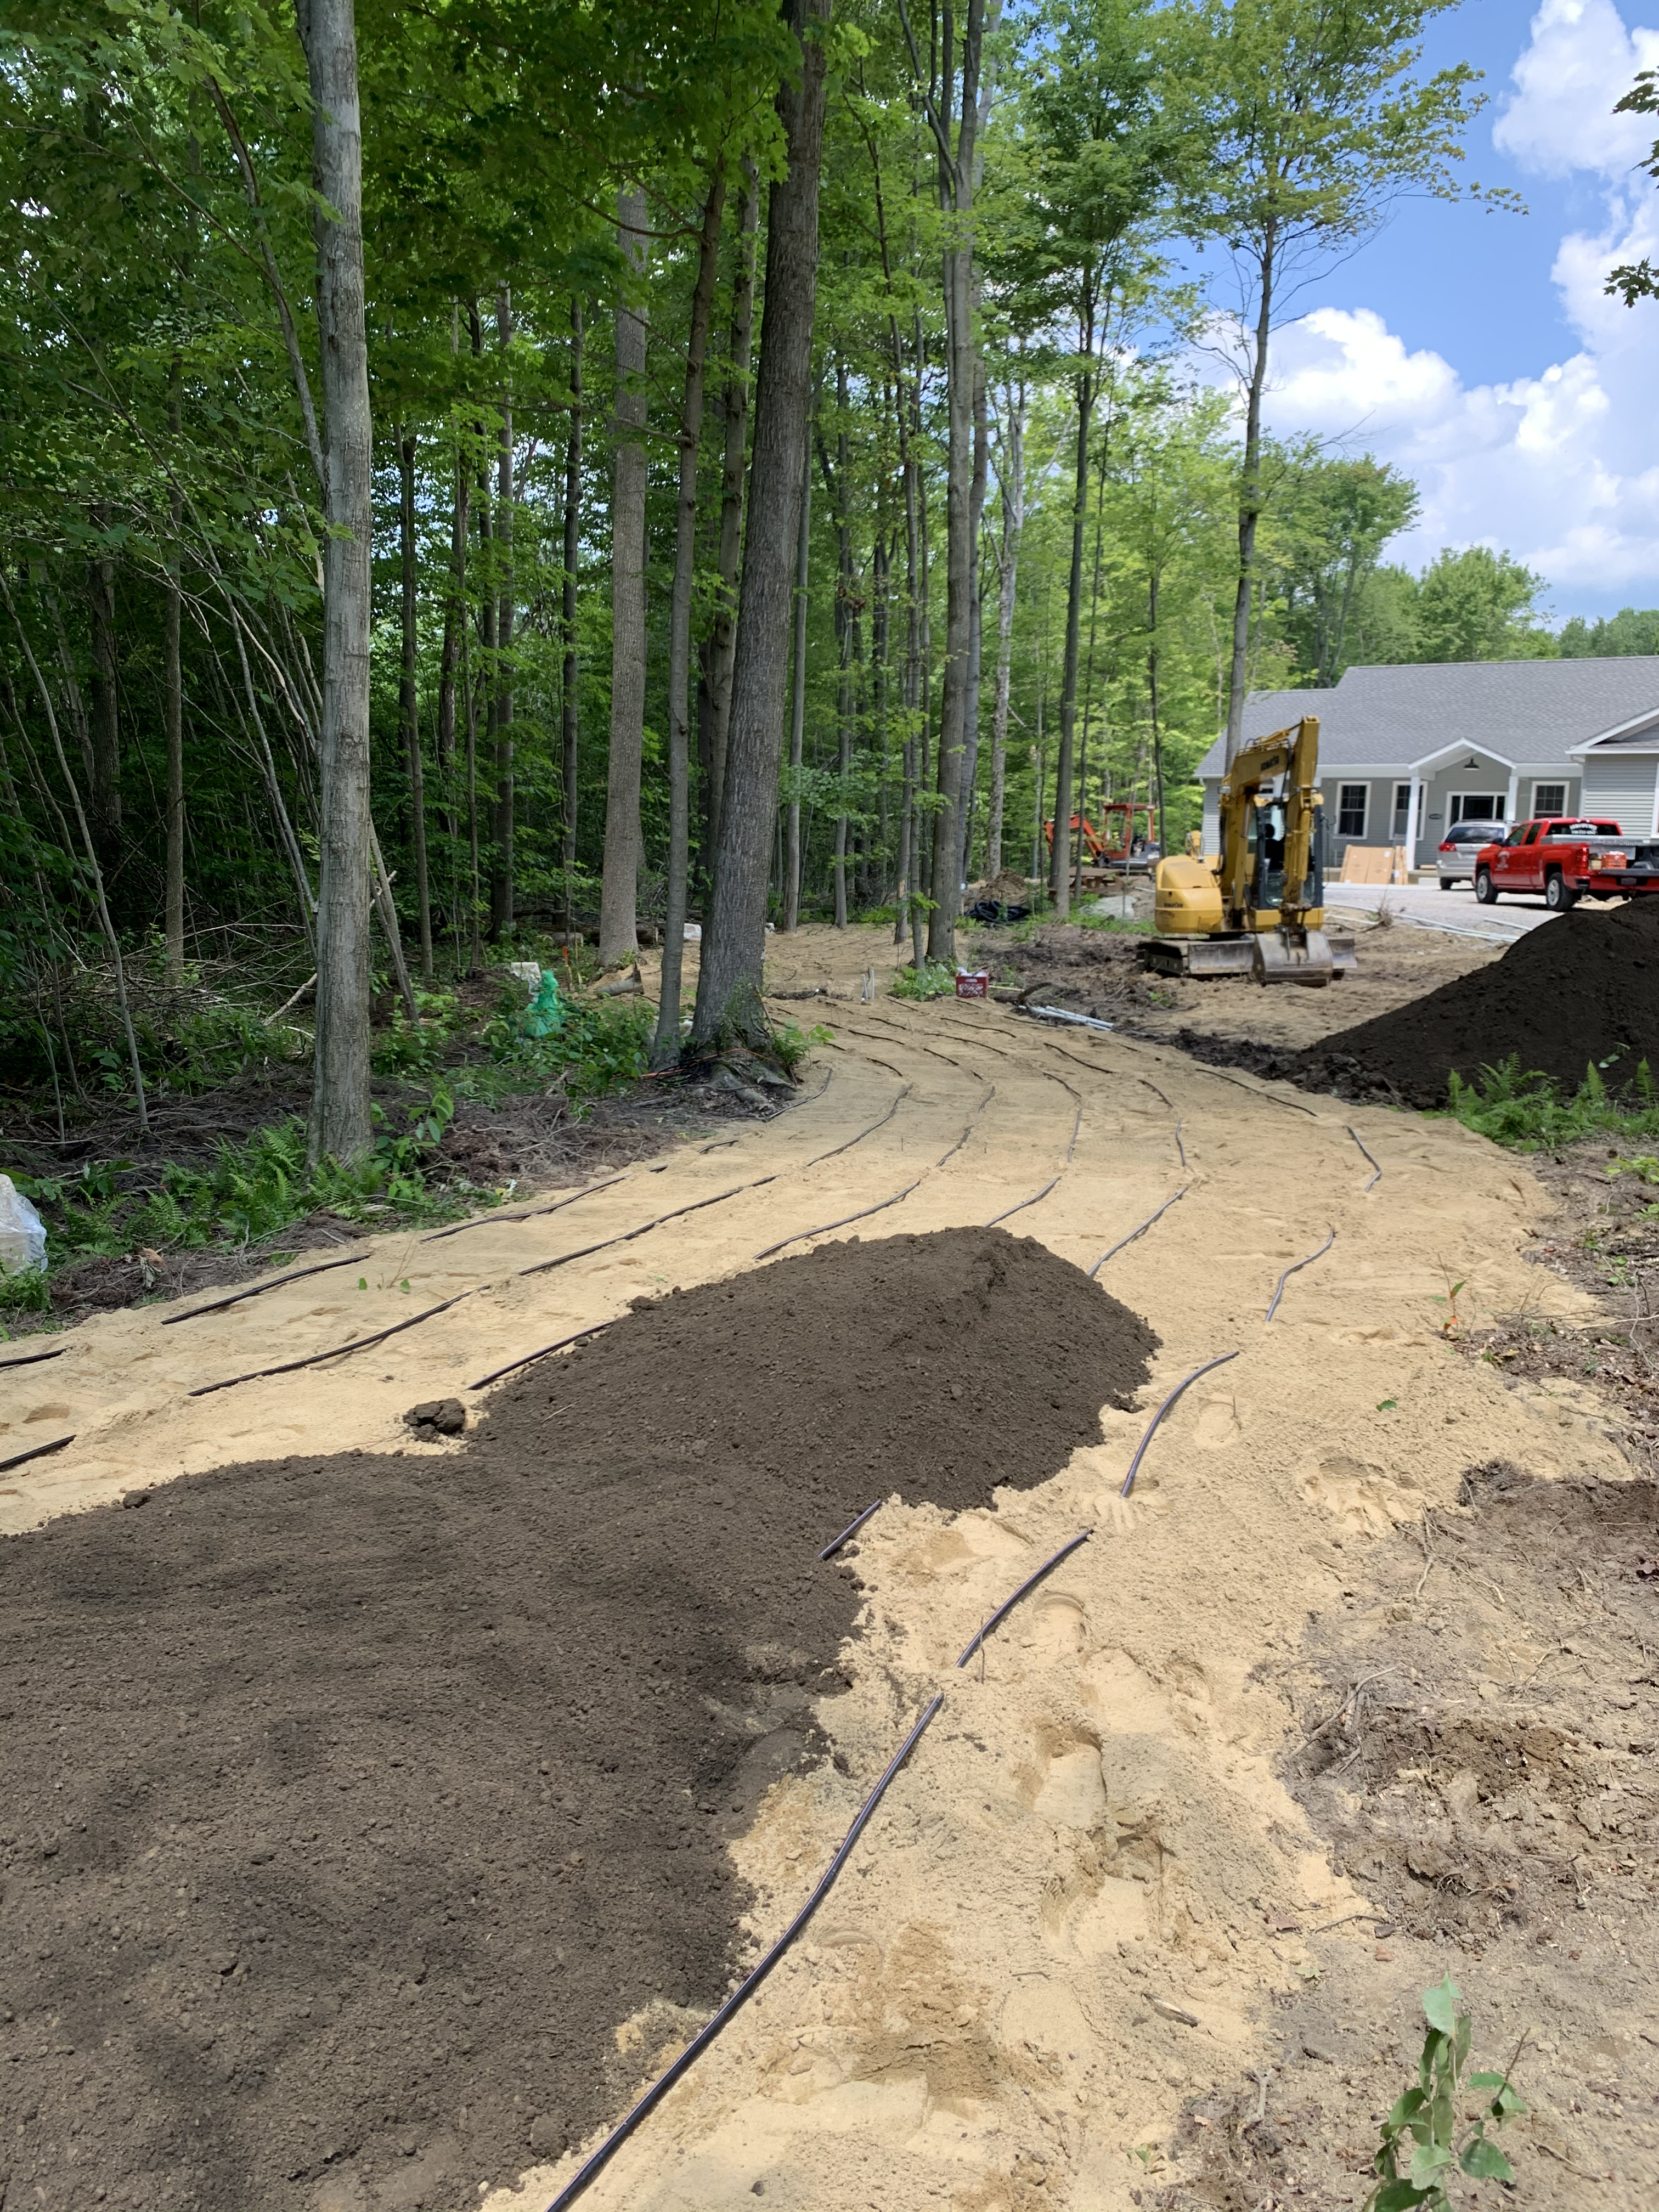 Efficient Drip Distribution Field for Septic System - Maximize Drainage and Sustainability